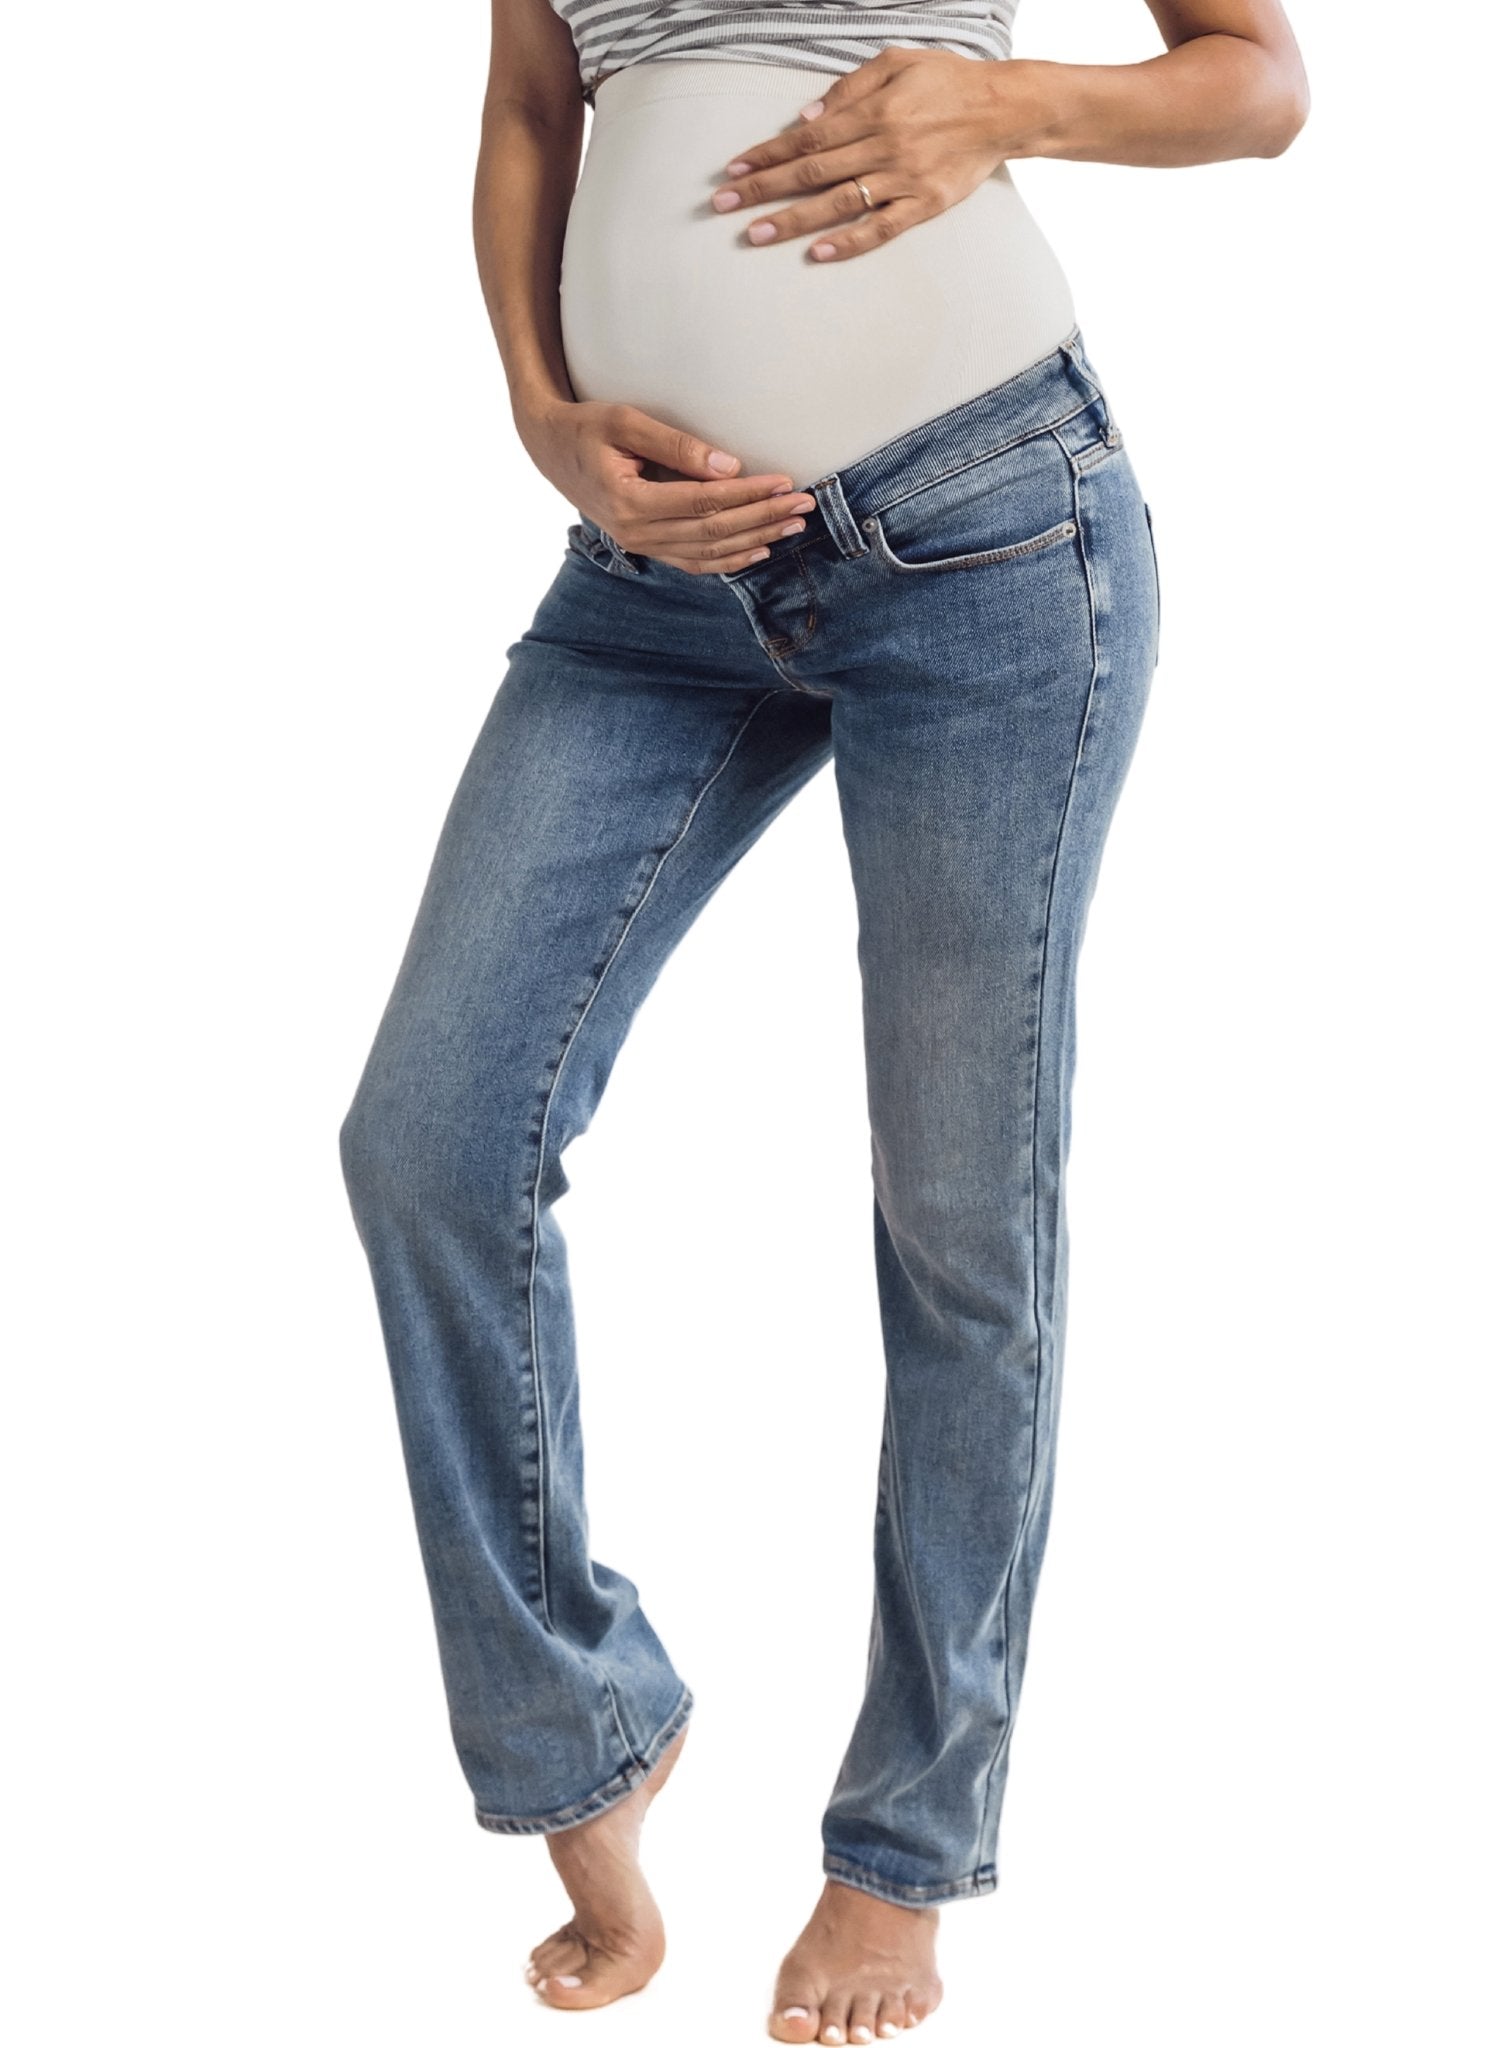 BLANQI Denim Maternity Belly Support Flare Jeans - Worn Indigo - Mums and Bumps